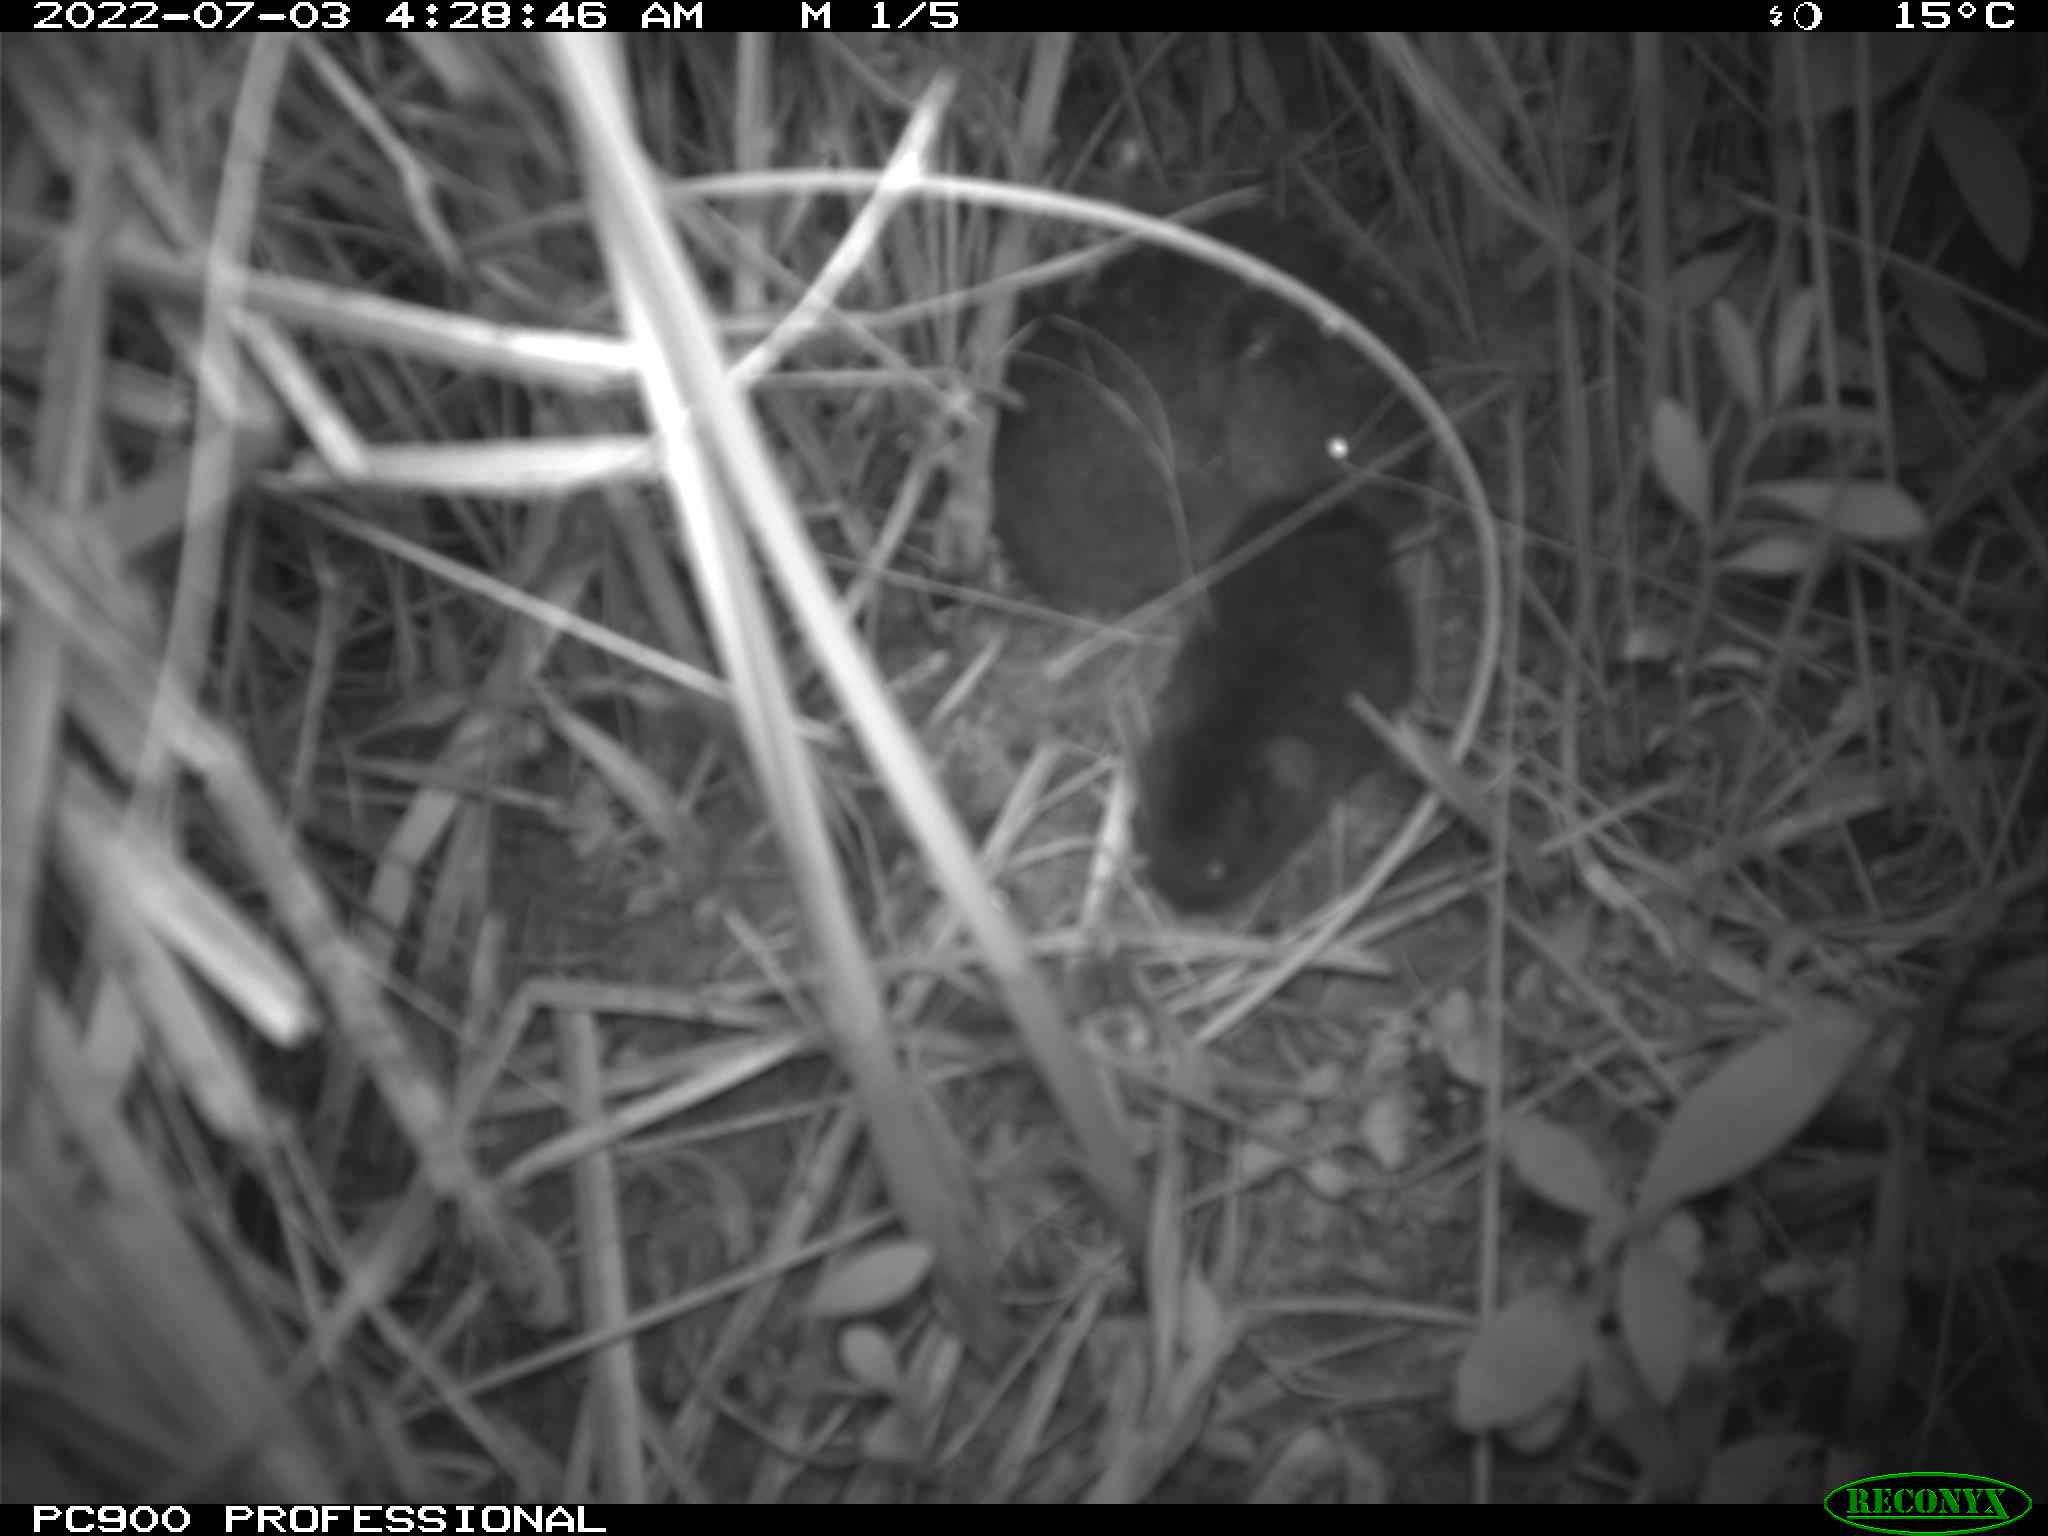 trail cam still shot of mother Amargosa vole and pup, in black and white